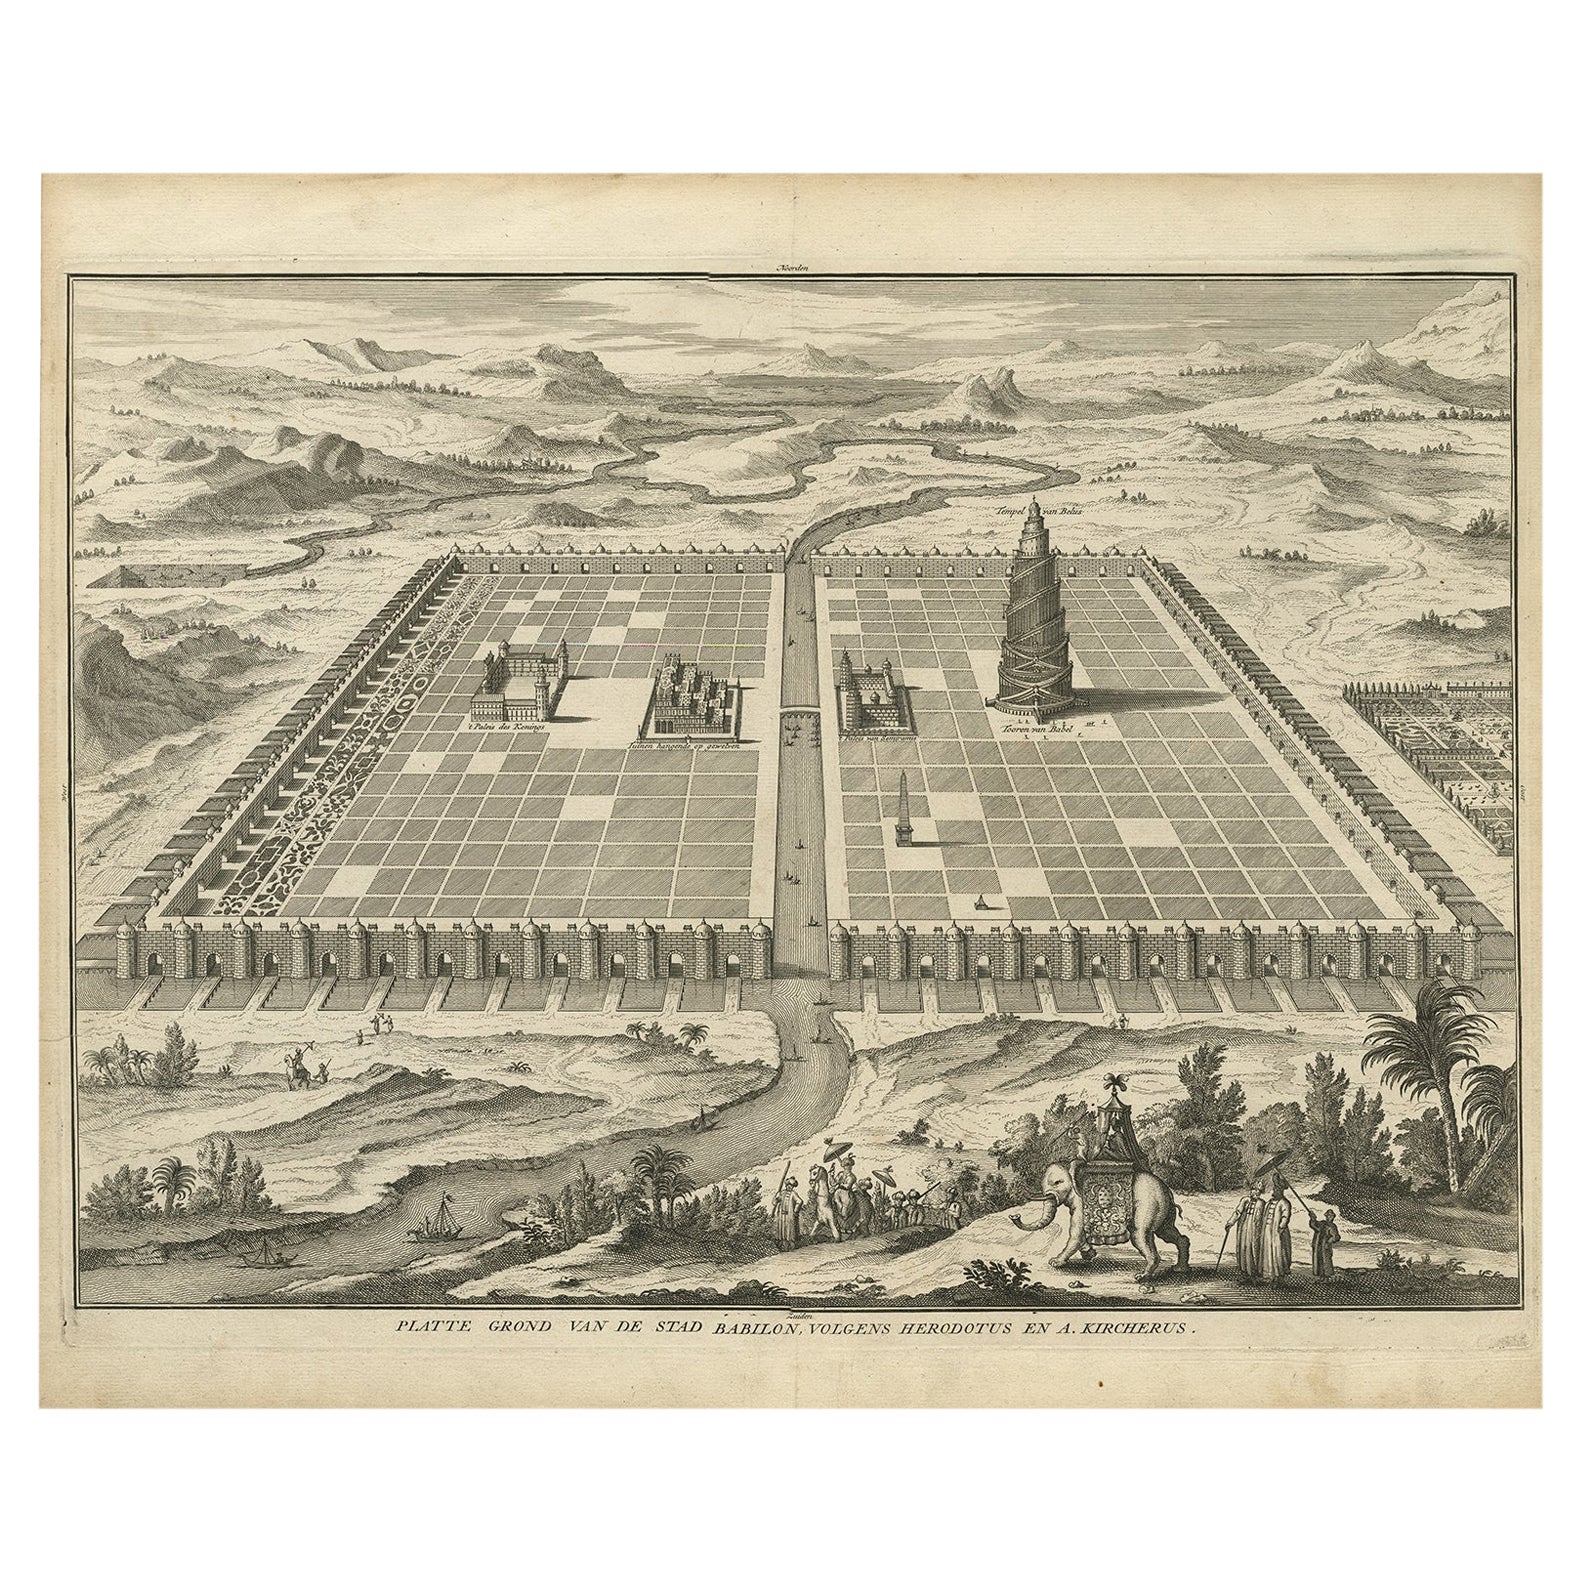 Ancient Babylon with The Tower of Babel According to Herodotus & Kircherus, 1730 For Sale